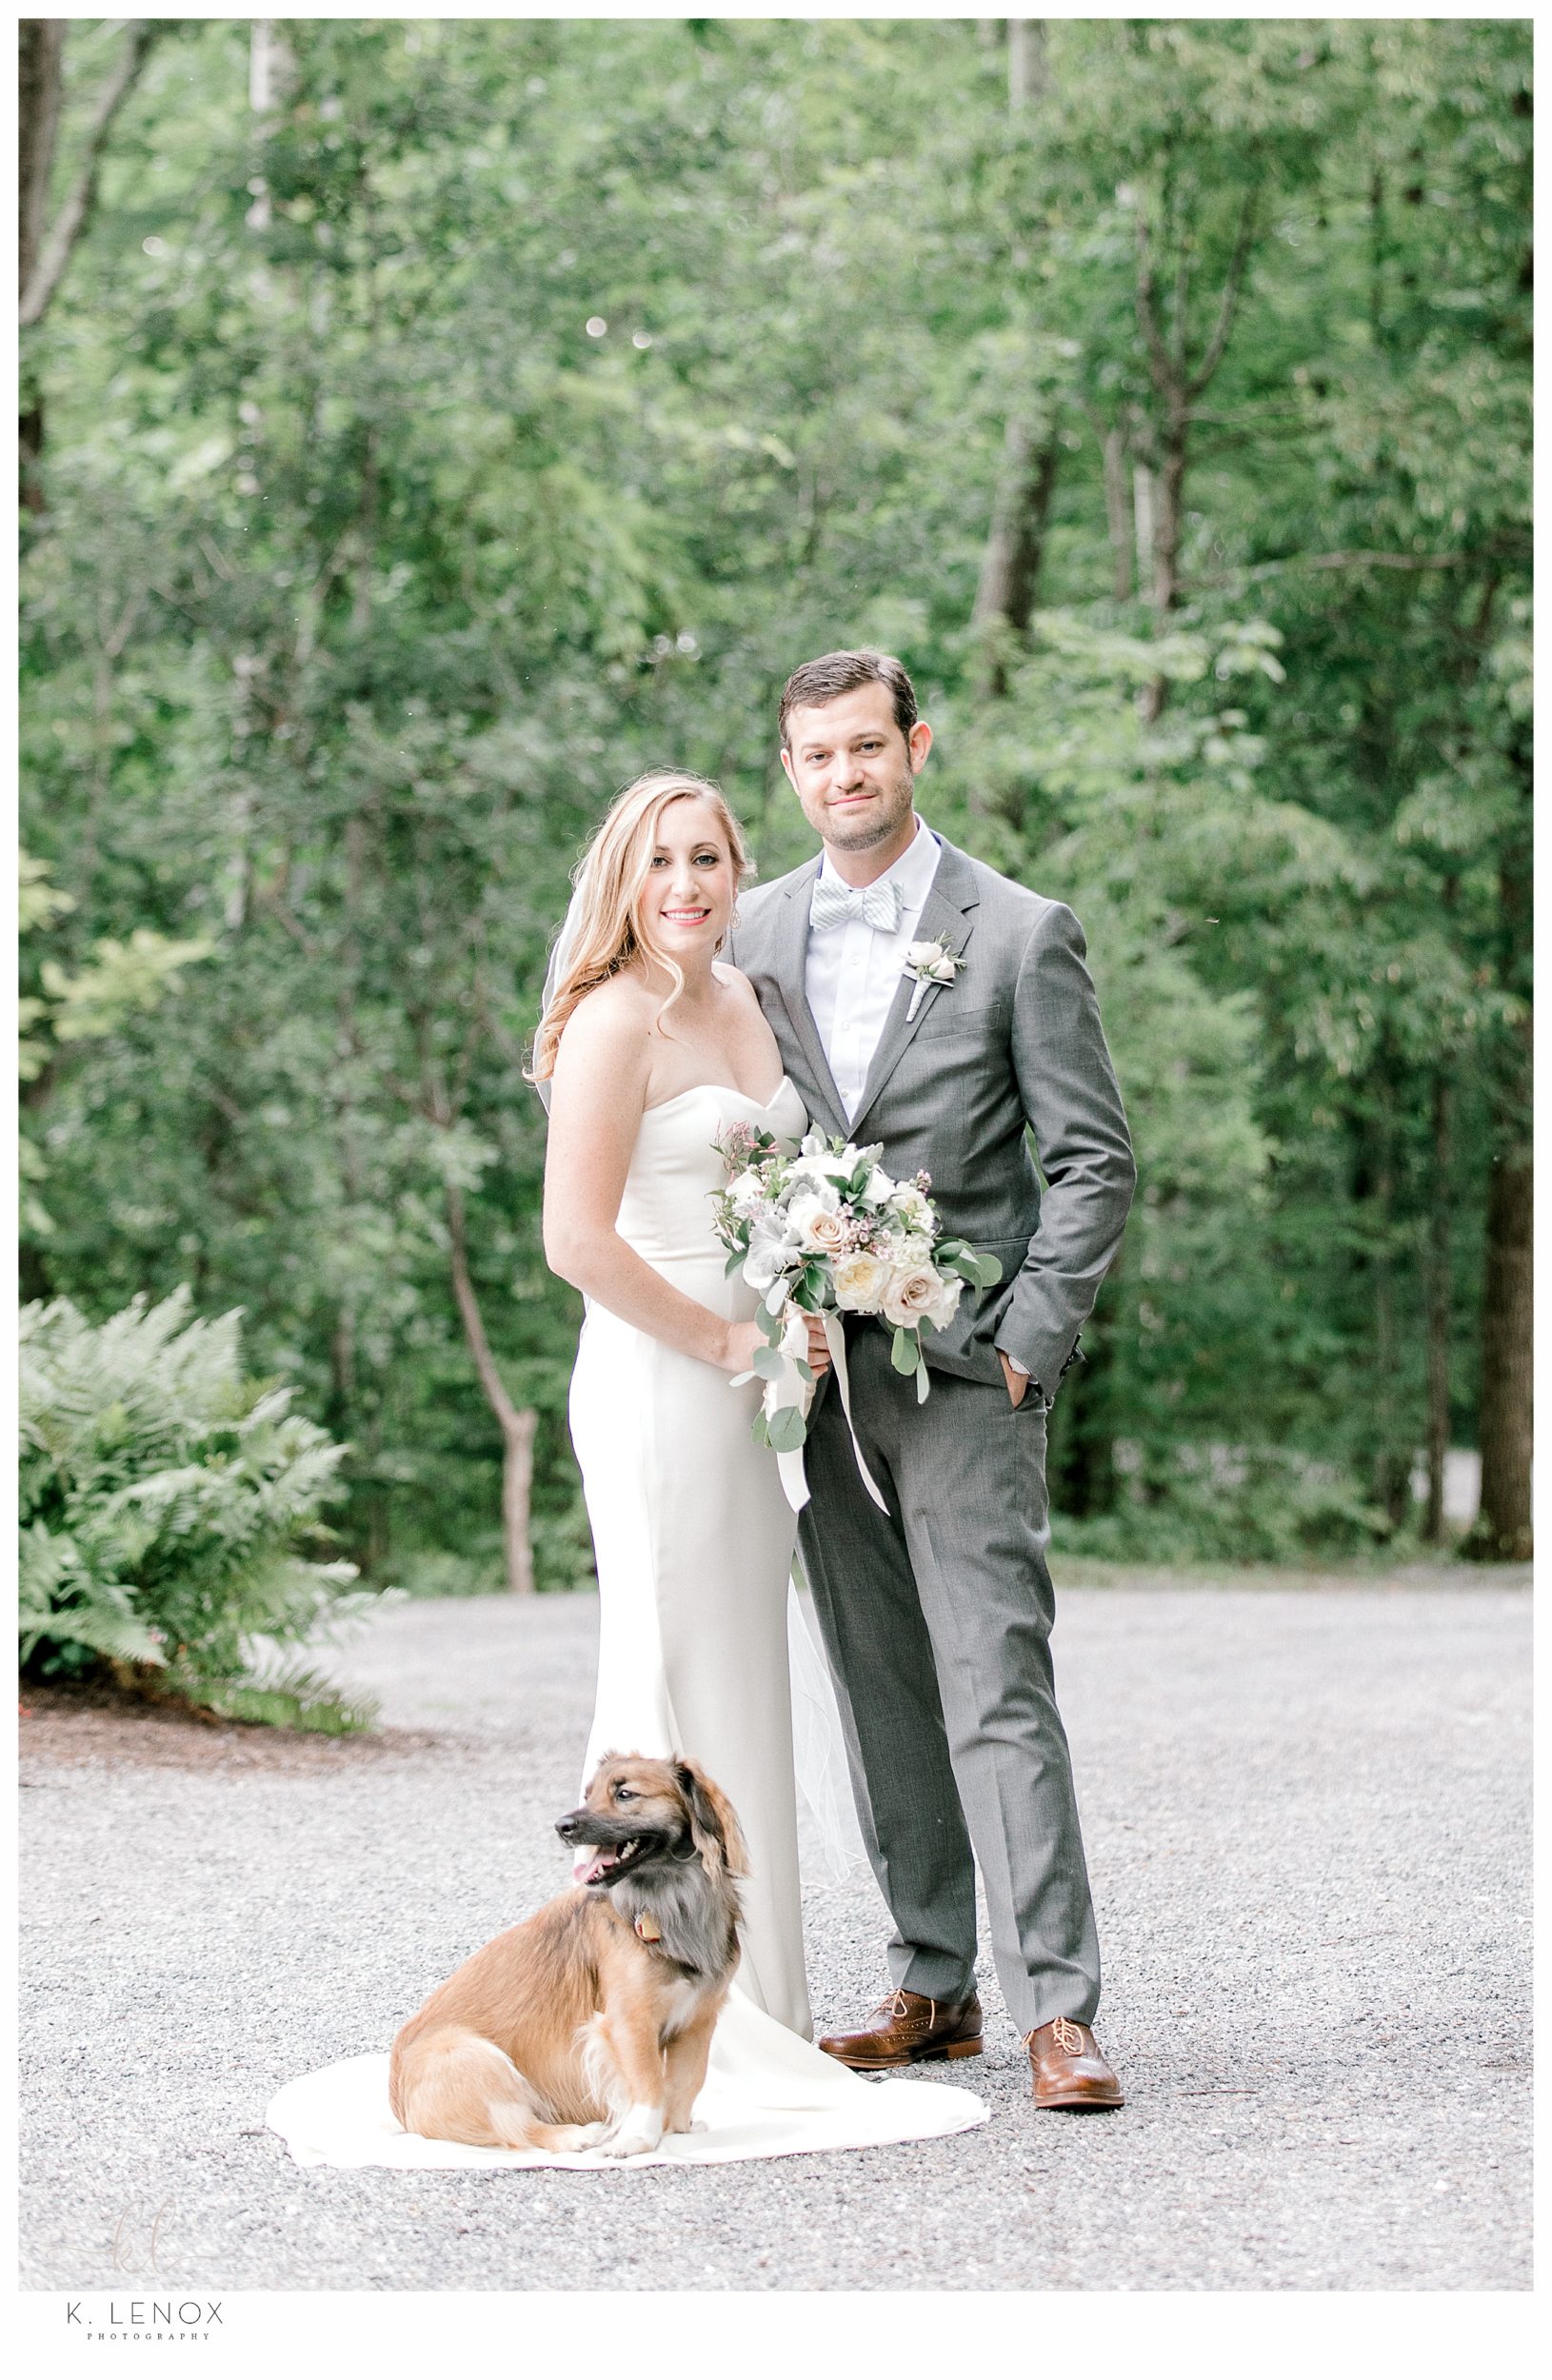 Formal Wedding day photo of a bride and groom and their dog. Taken by K. Lenox Photography